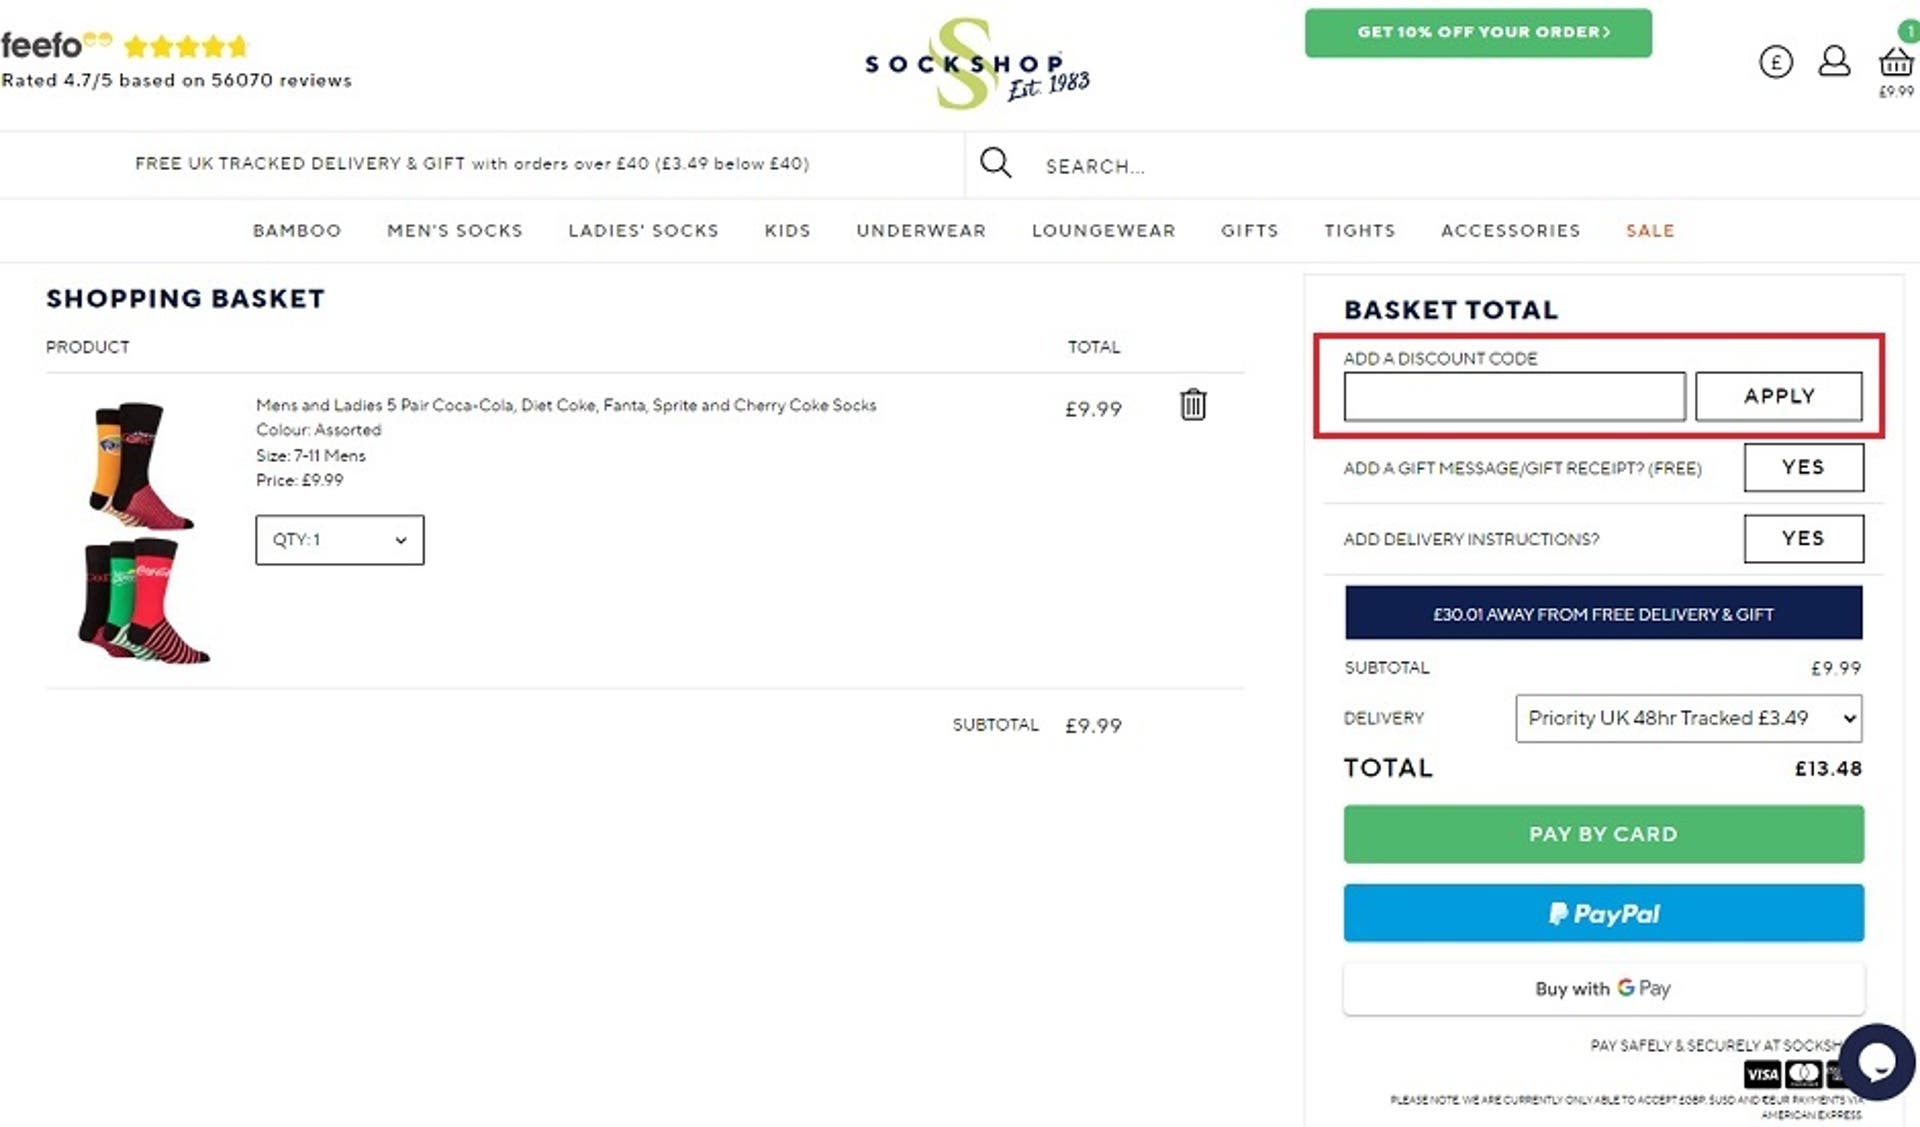  A screenshot of the SOCKSHOP website showing users how to use their discount code with the 'Add a Discount Code' box and 'Apply' button highlighted. 